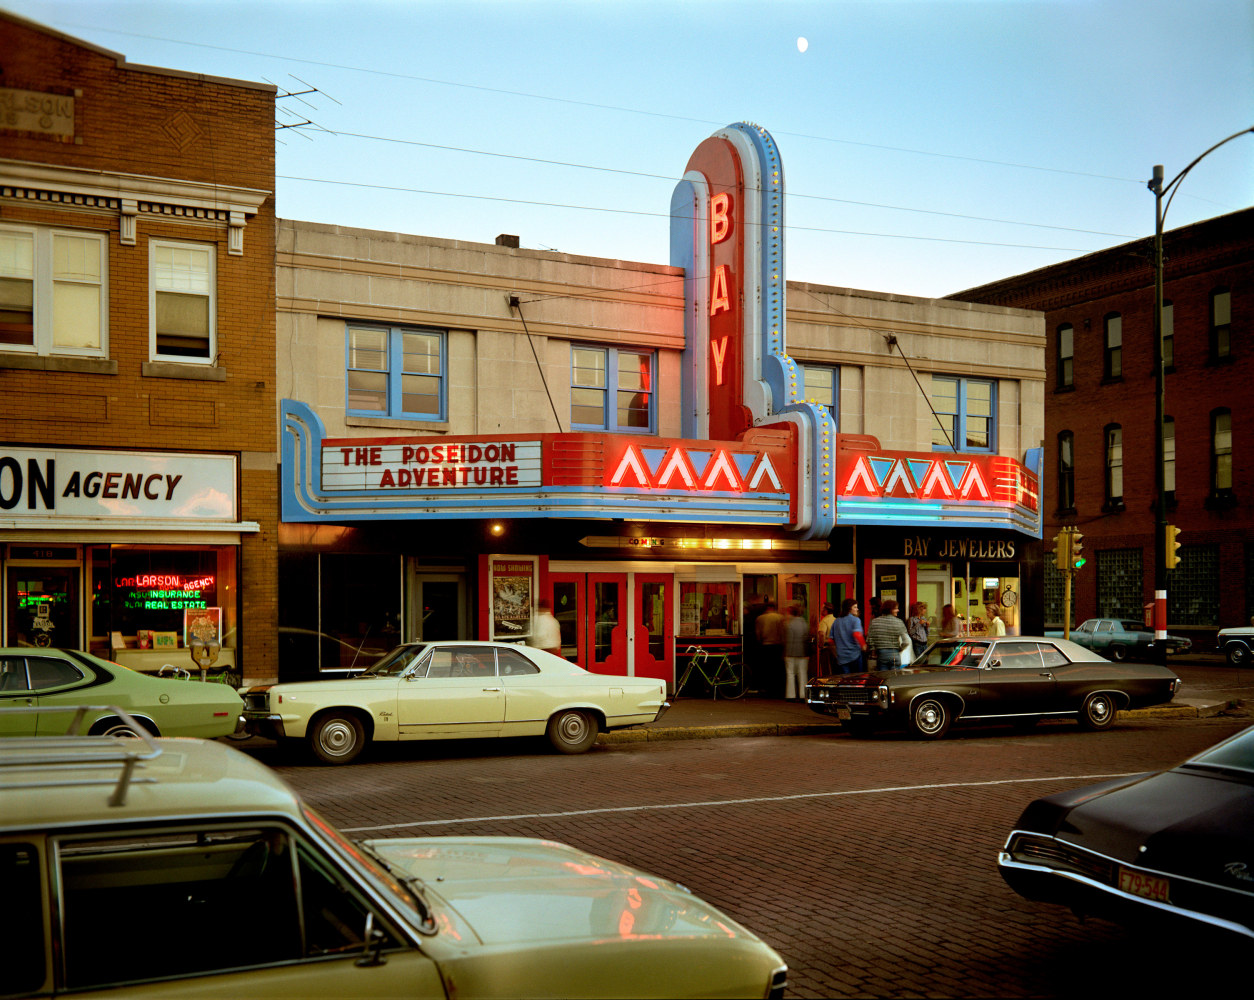 Stephen Shore

Second Street, Ashland, Wisconsin, July 9, 1973

1973

Chromogenic color print

17 1/2 x 22 inches (44.5 x 55.9 cm)

20 x 24 inches (50.8 x 61 cm) paper size

Edition of 8

SS 067